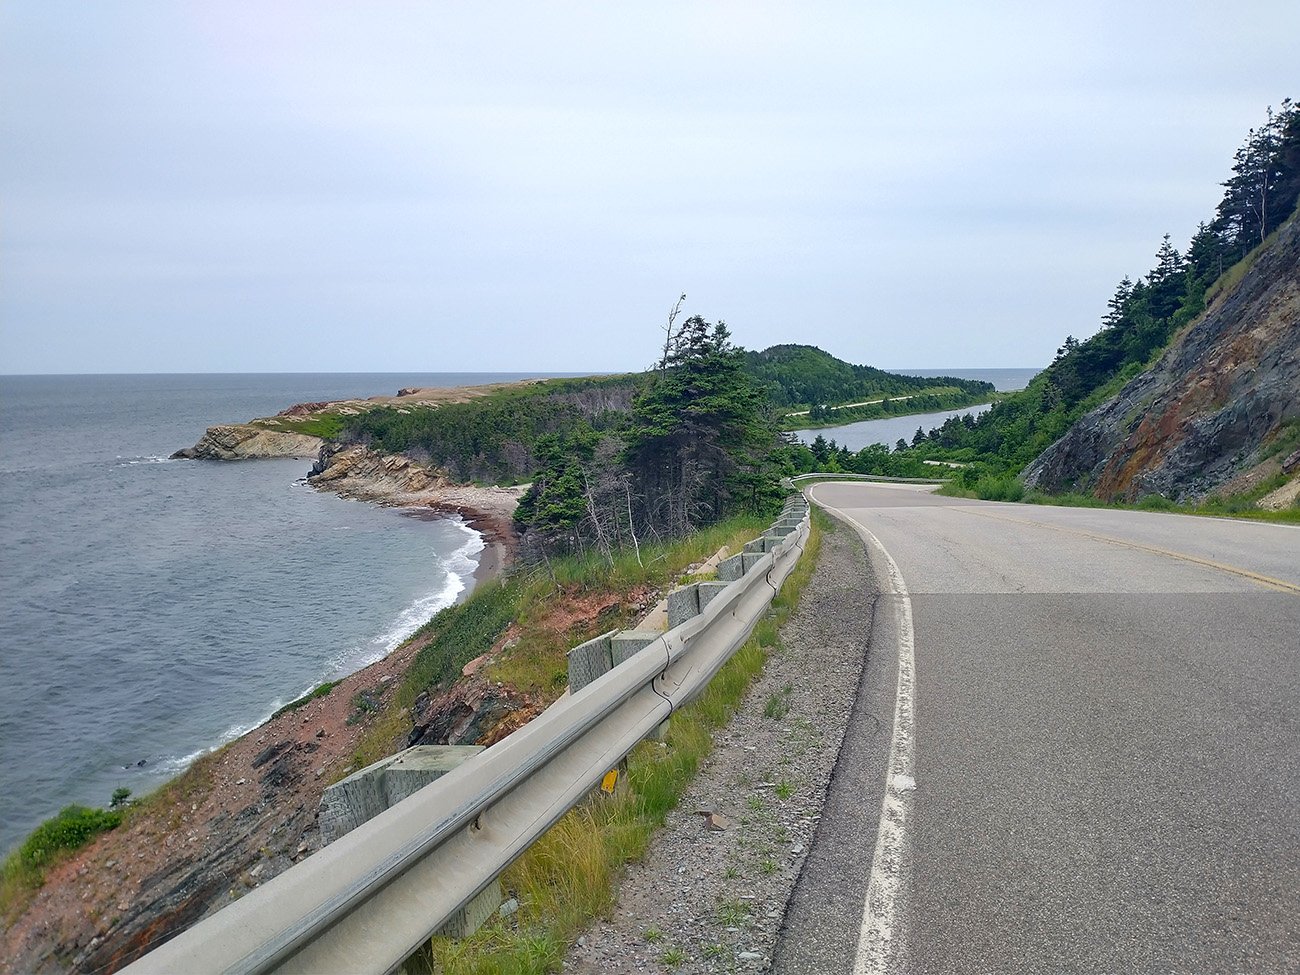 You don't see much going up but then descend with these insane views of the road winding through jagged cliffs and coastlines. Easy top 10 roads in Canada.